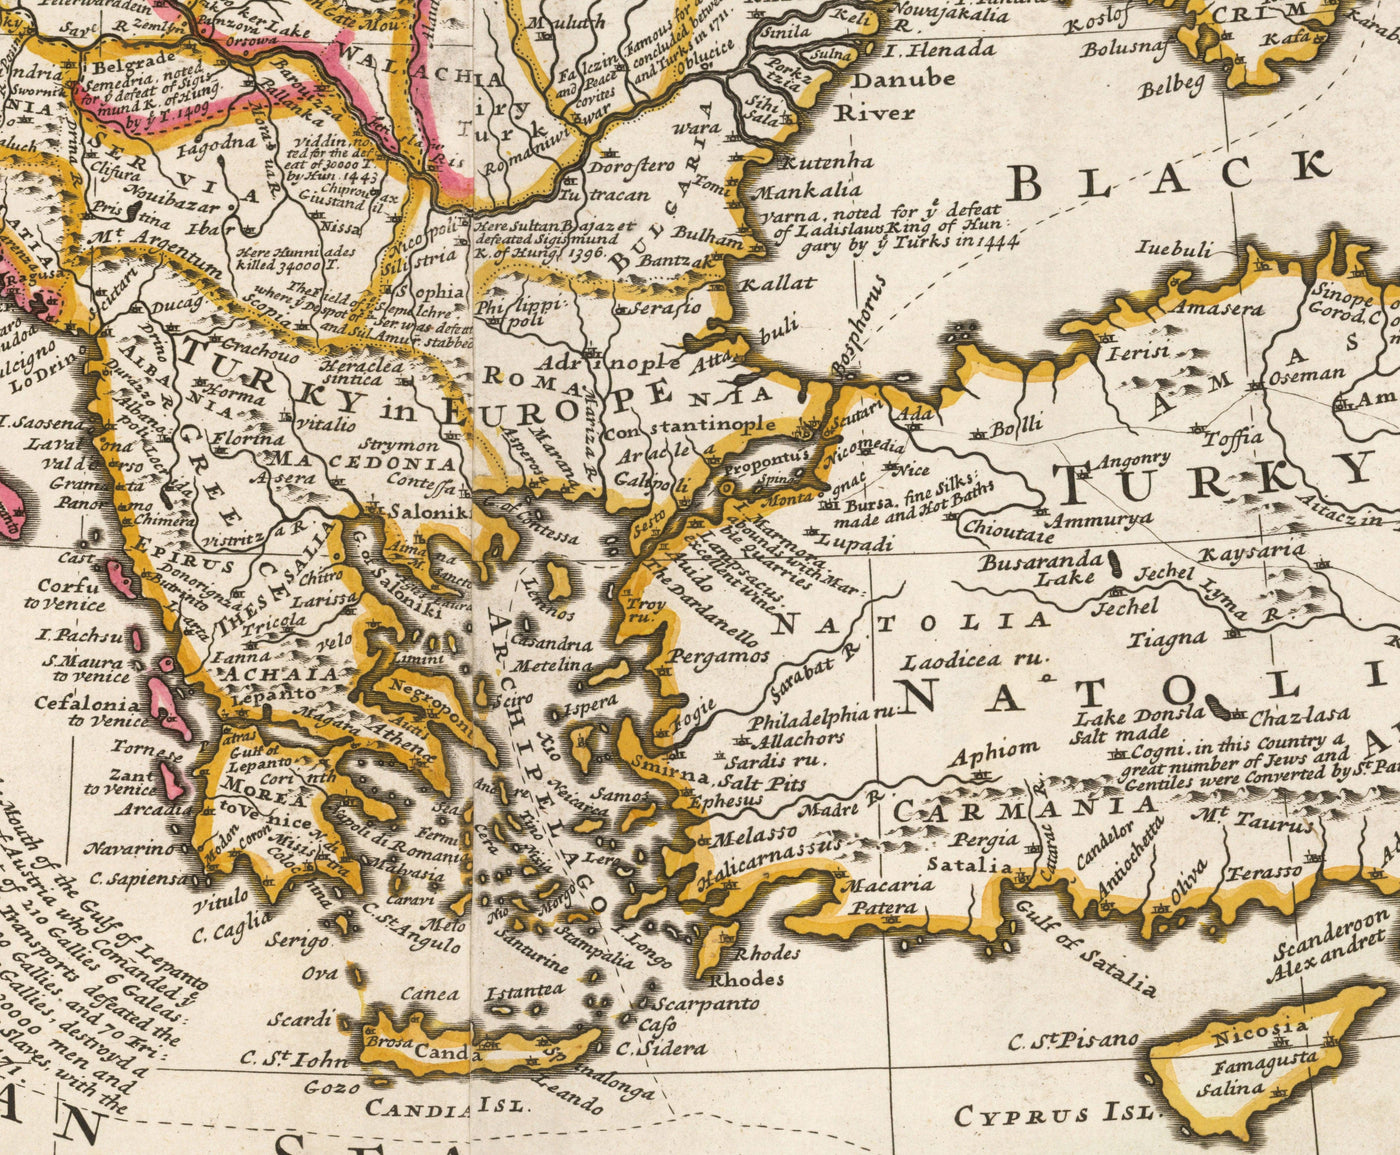 Old Map of Ottoman Empire, 1714 by Herman Moll - Turkish Empire - South Europe, North Africa, Balkans, Middle East